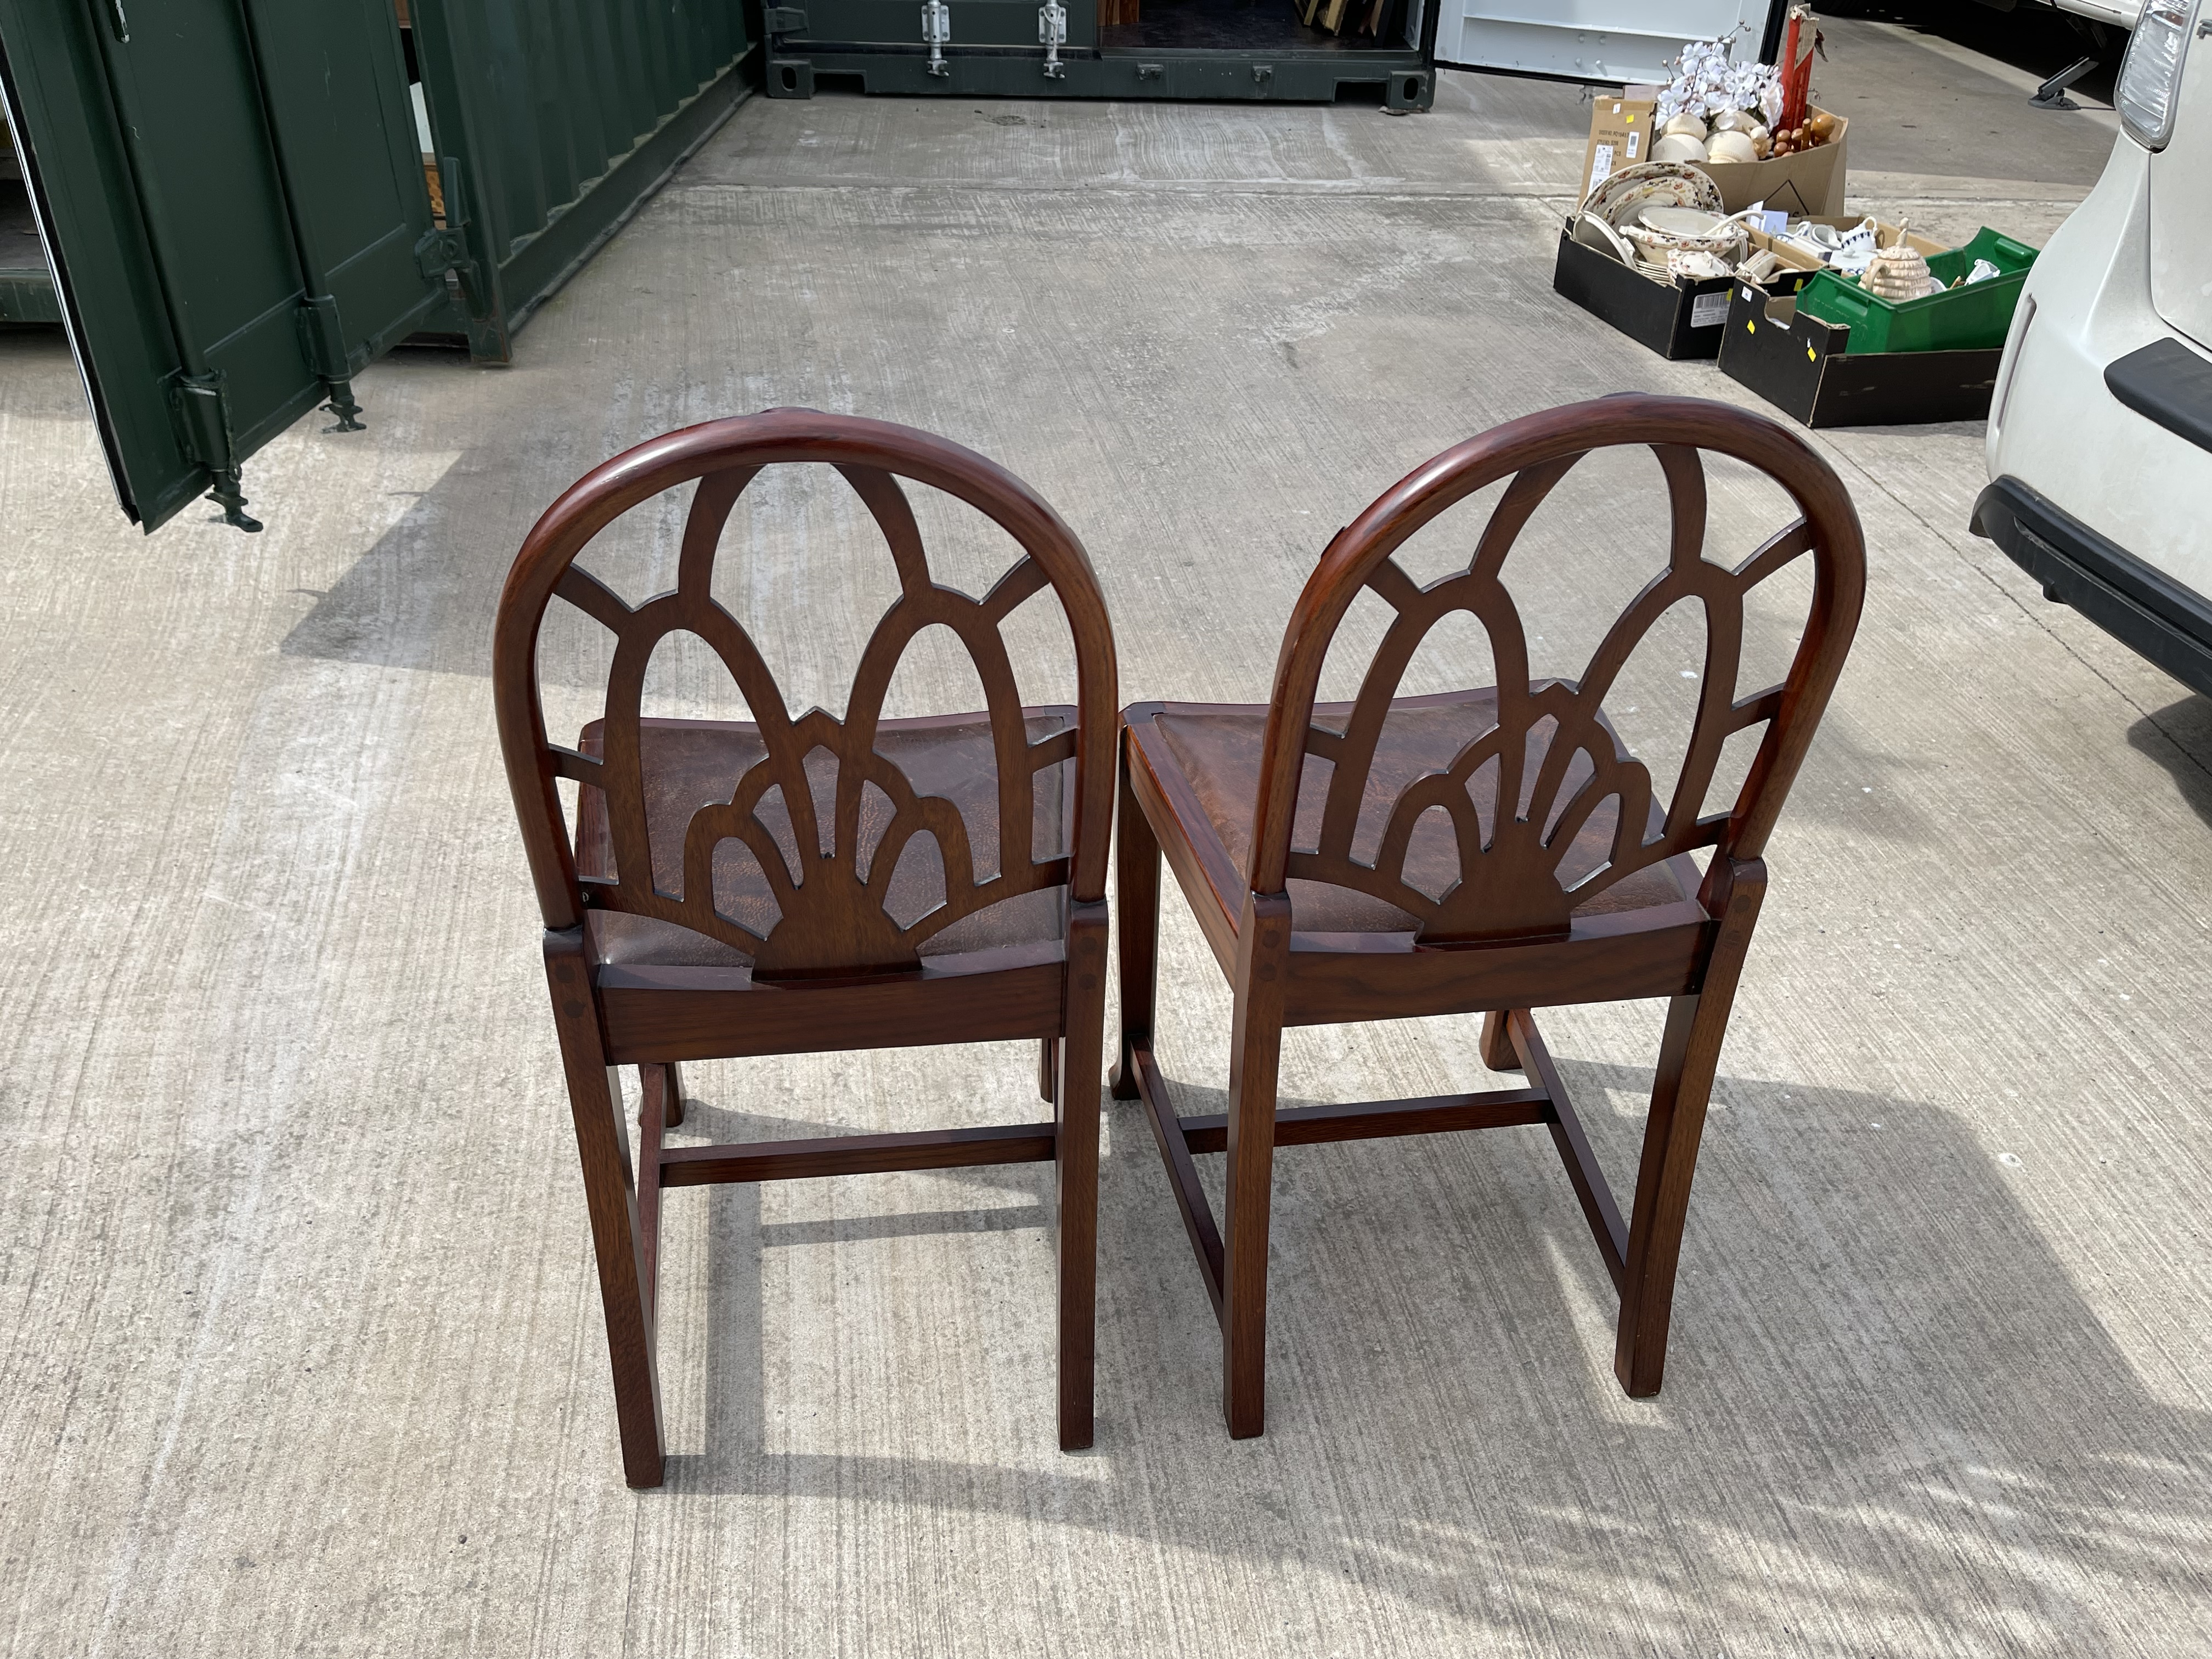 Pair of Vintage Gothic Chairs - Image 5 of 5